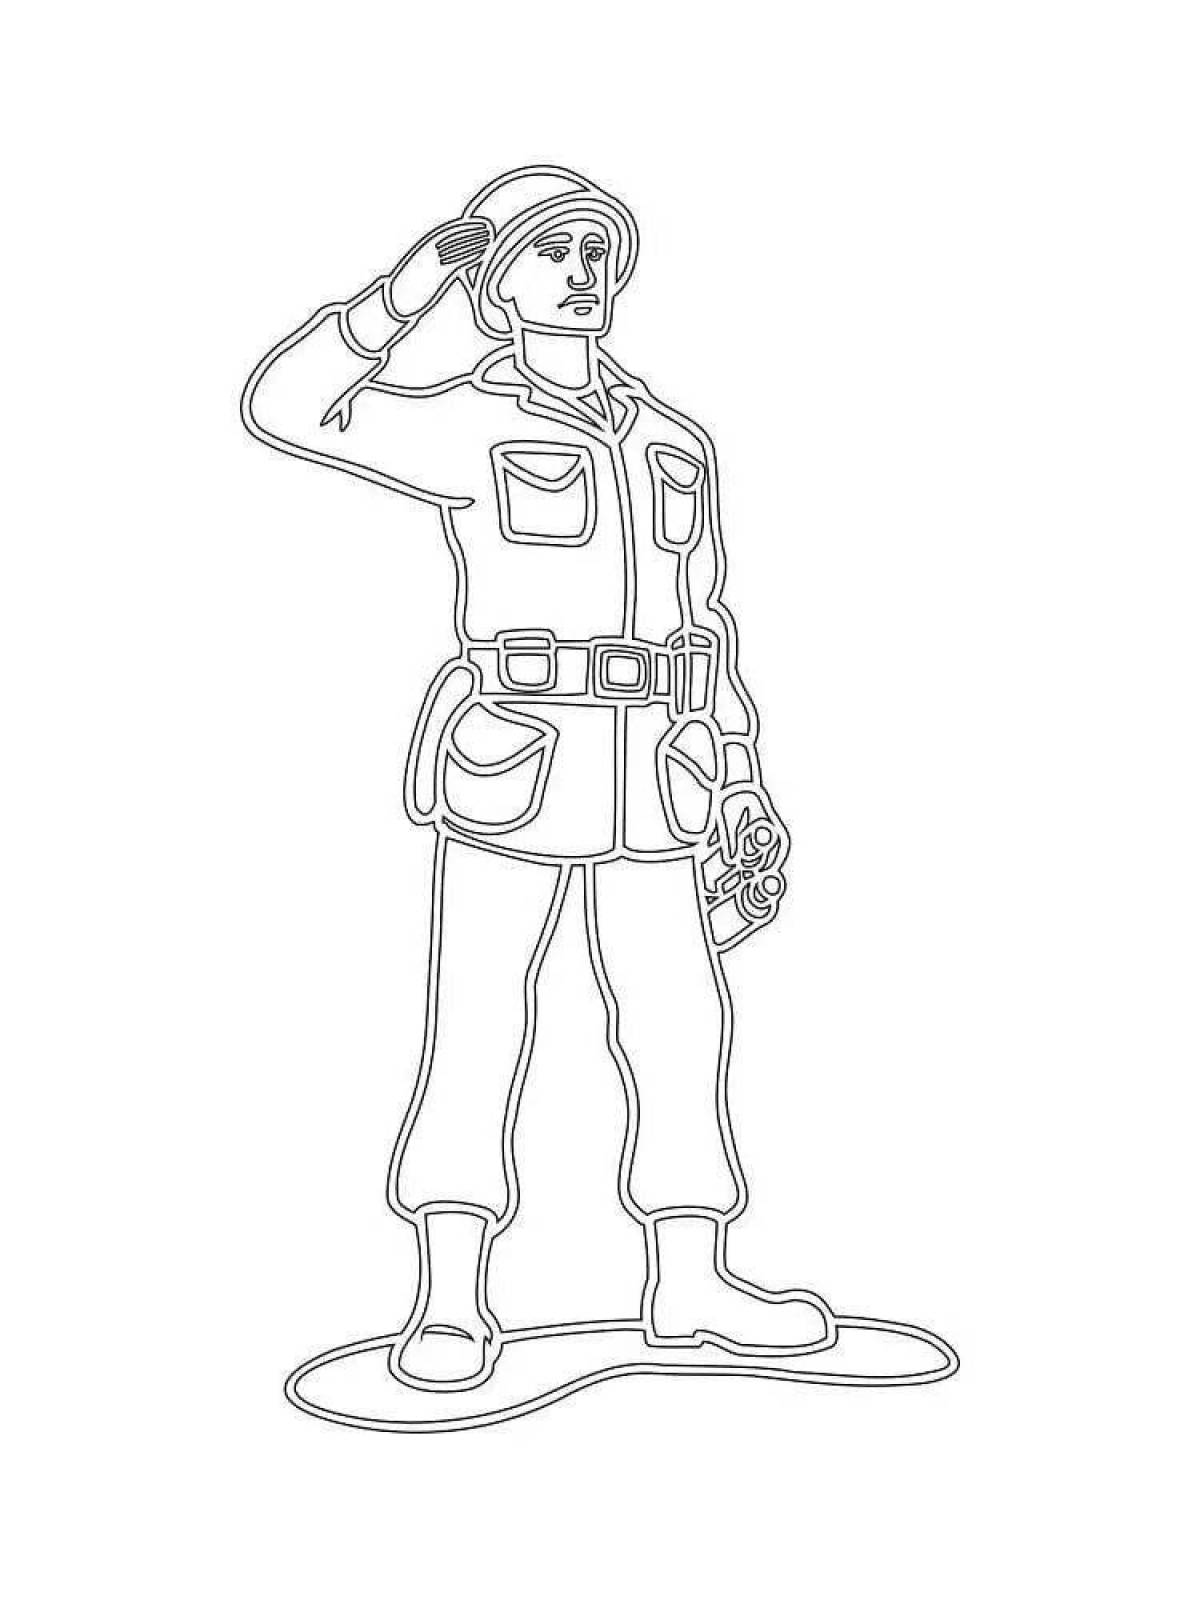 Bold military soldiers coloring pages for boys